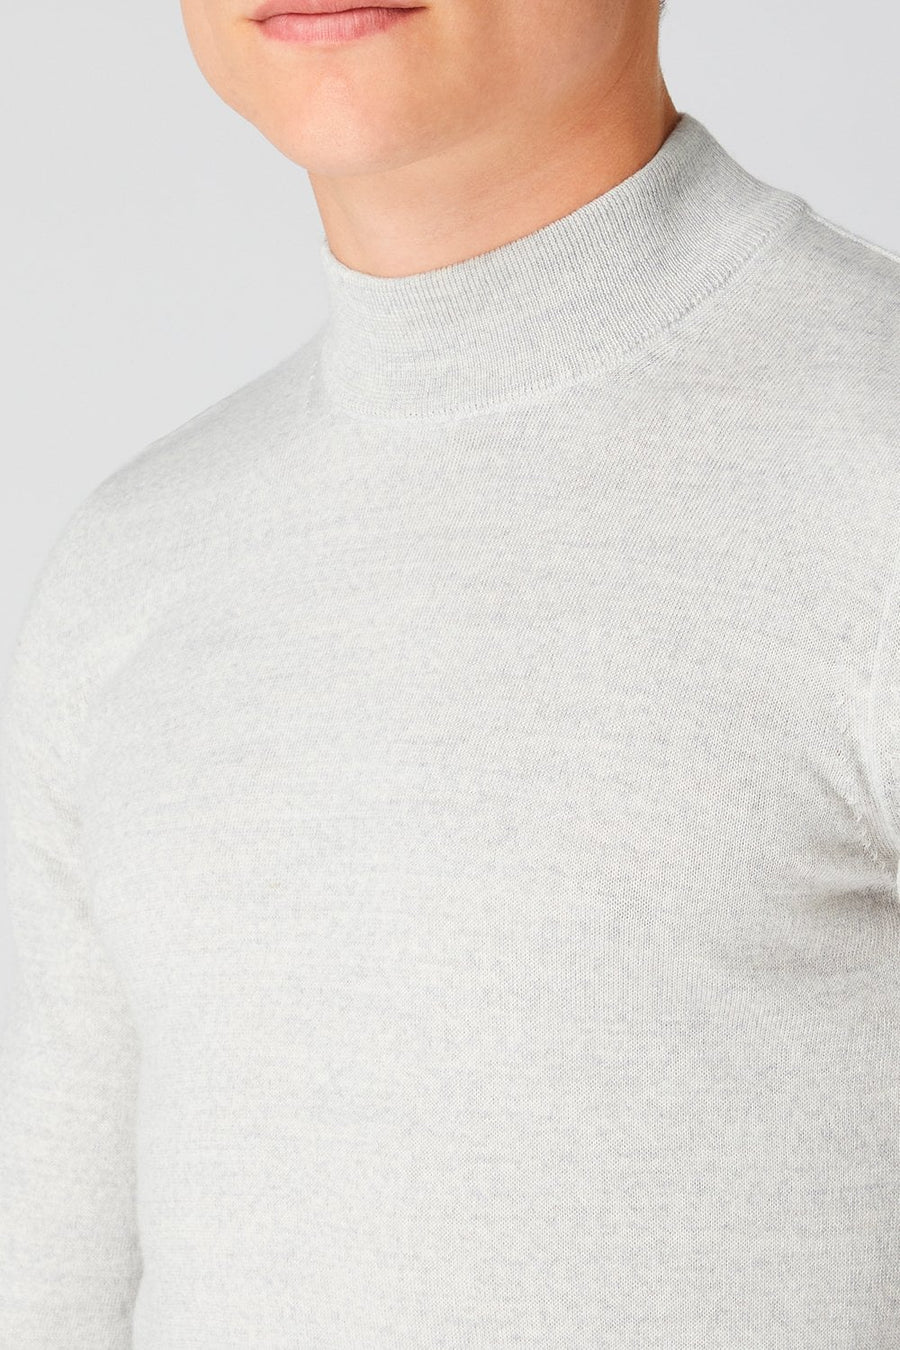 Buy the Remus Uomo 53889 Knitwear in Grey at Intro. Spend £50 for free UK delivery. Official stockists. We ship worldwide.